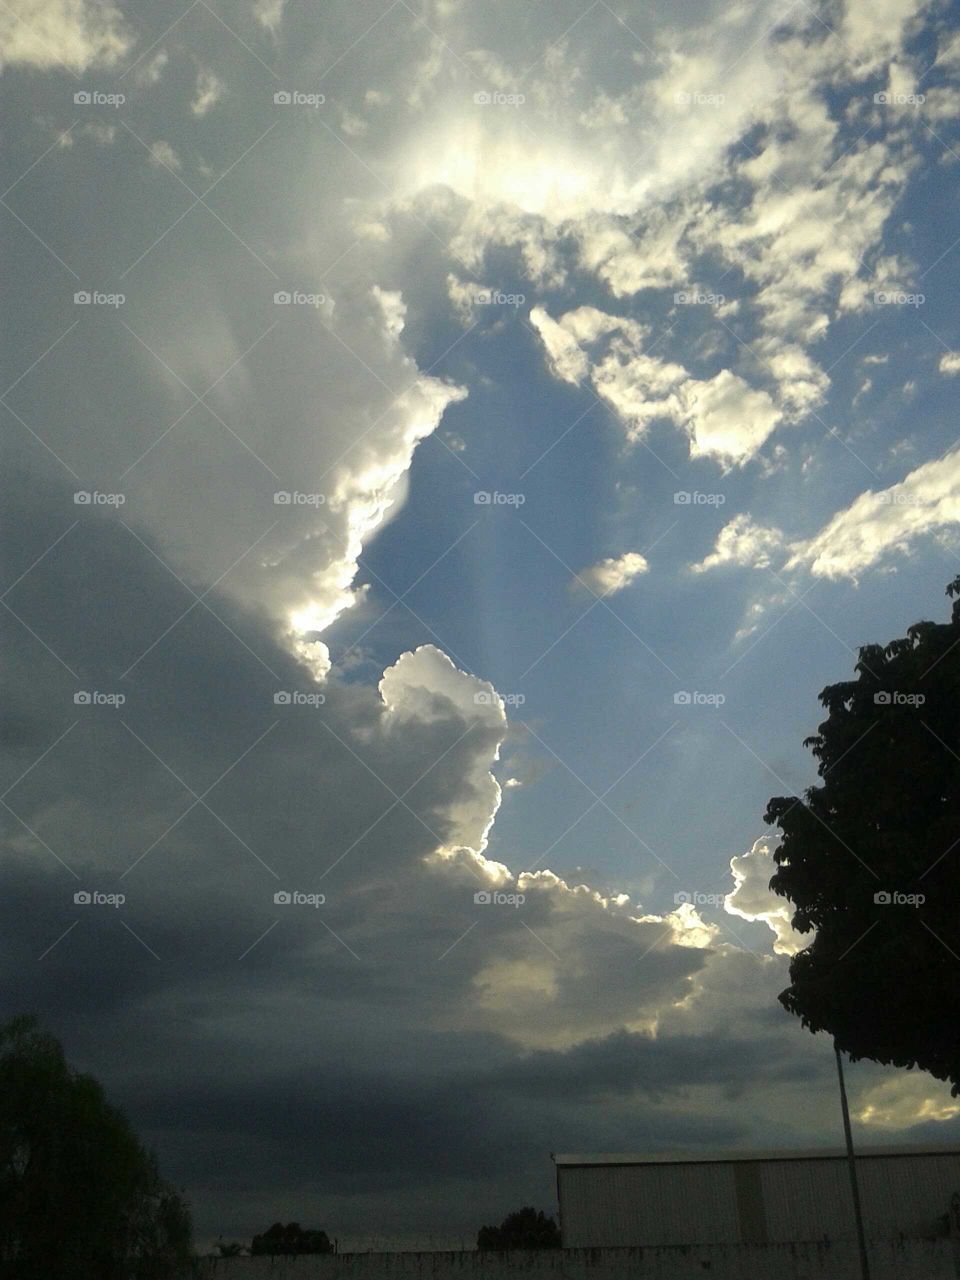 No Person, Sky, Sunset, Outdoors, Storm